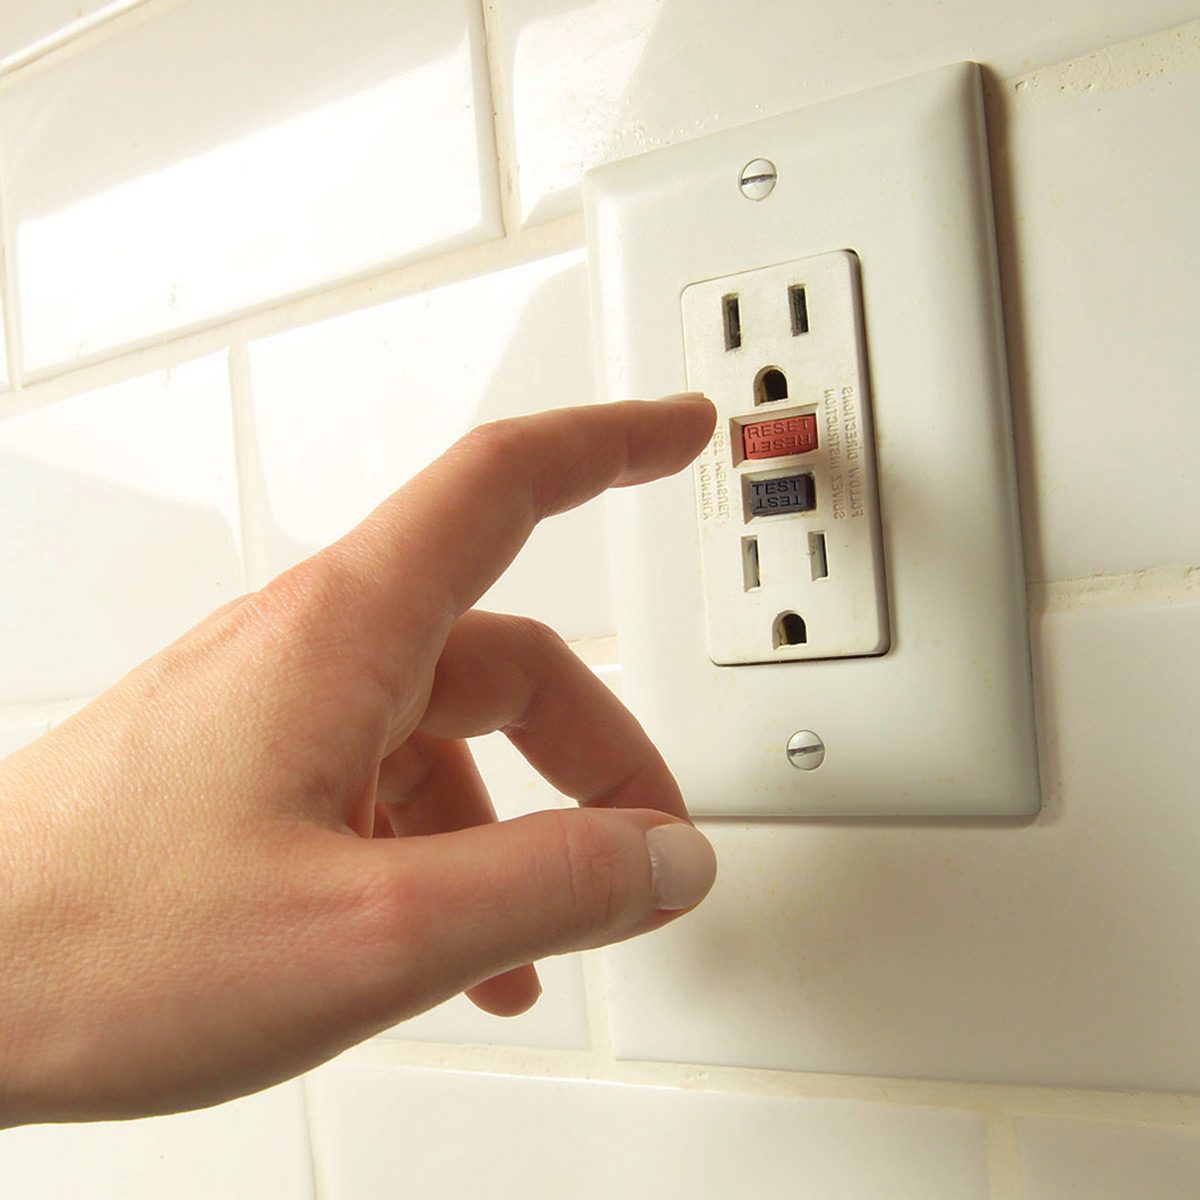 8 Most Common Electric Mistakes Found in Home Inspections